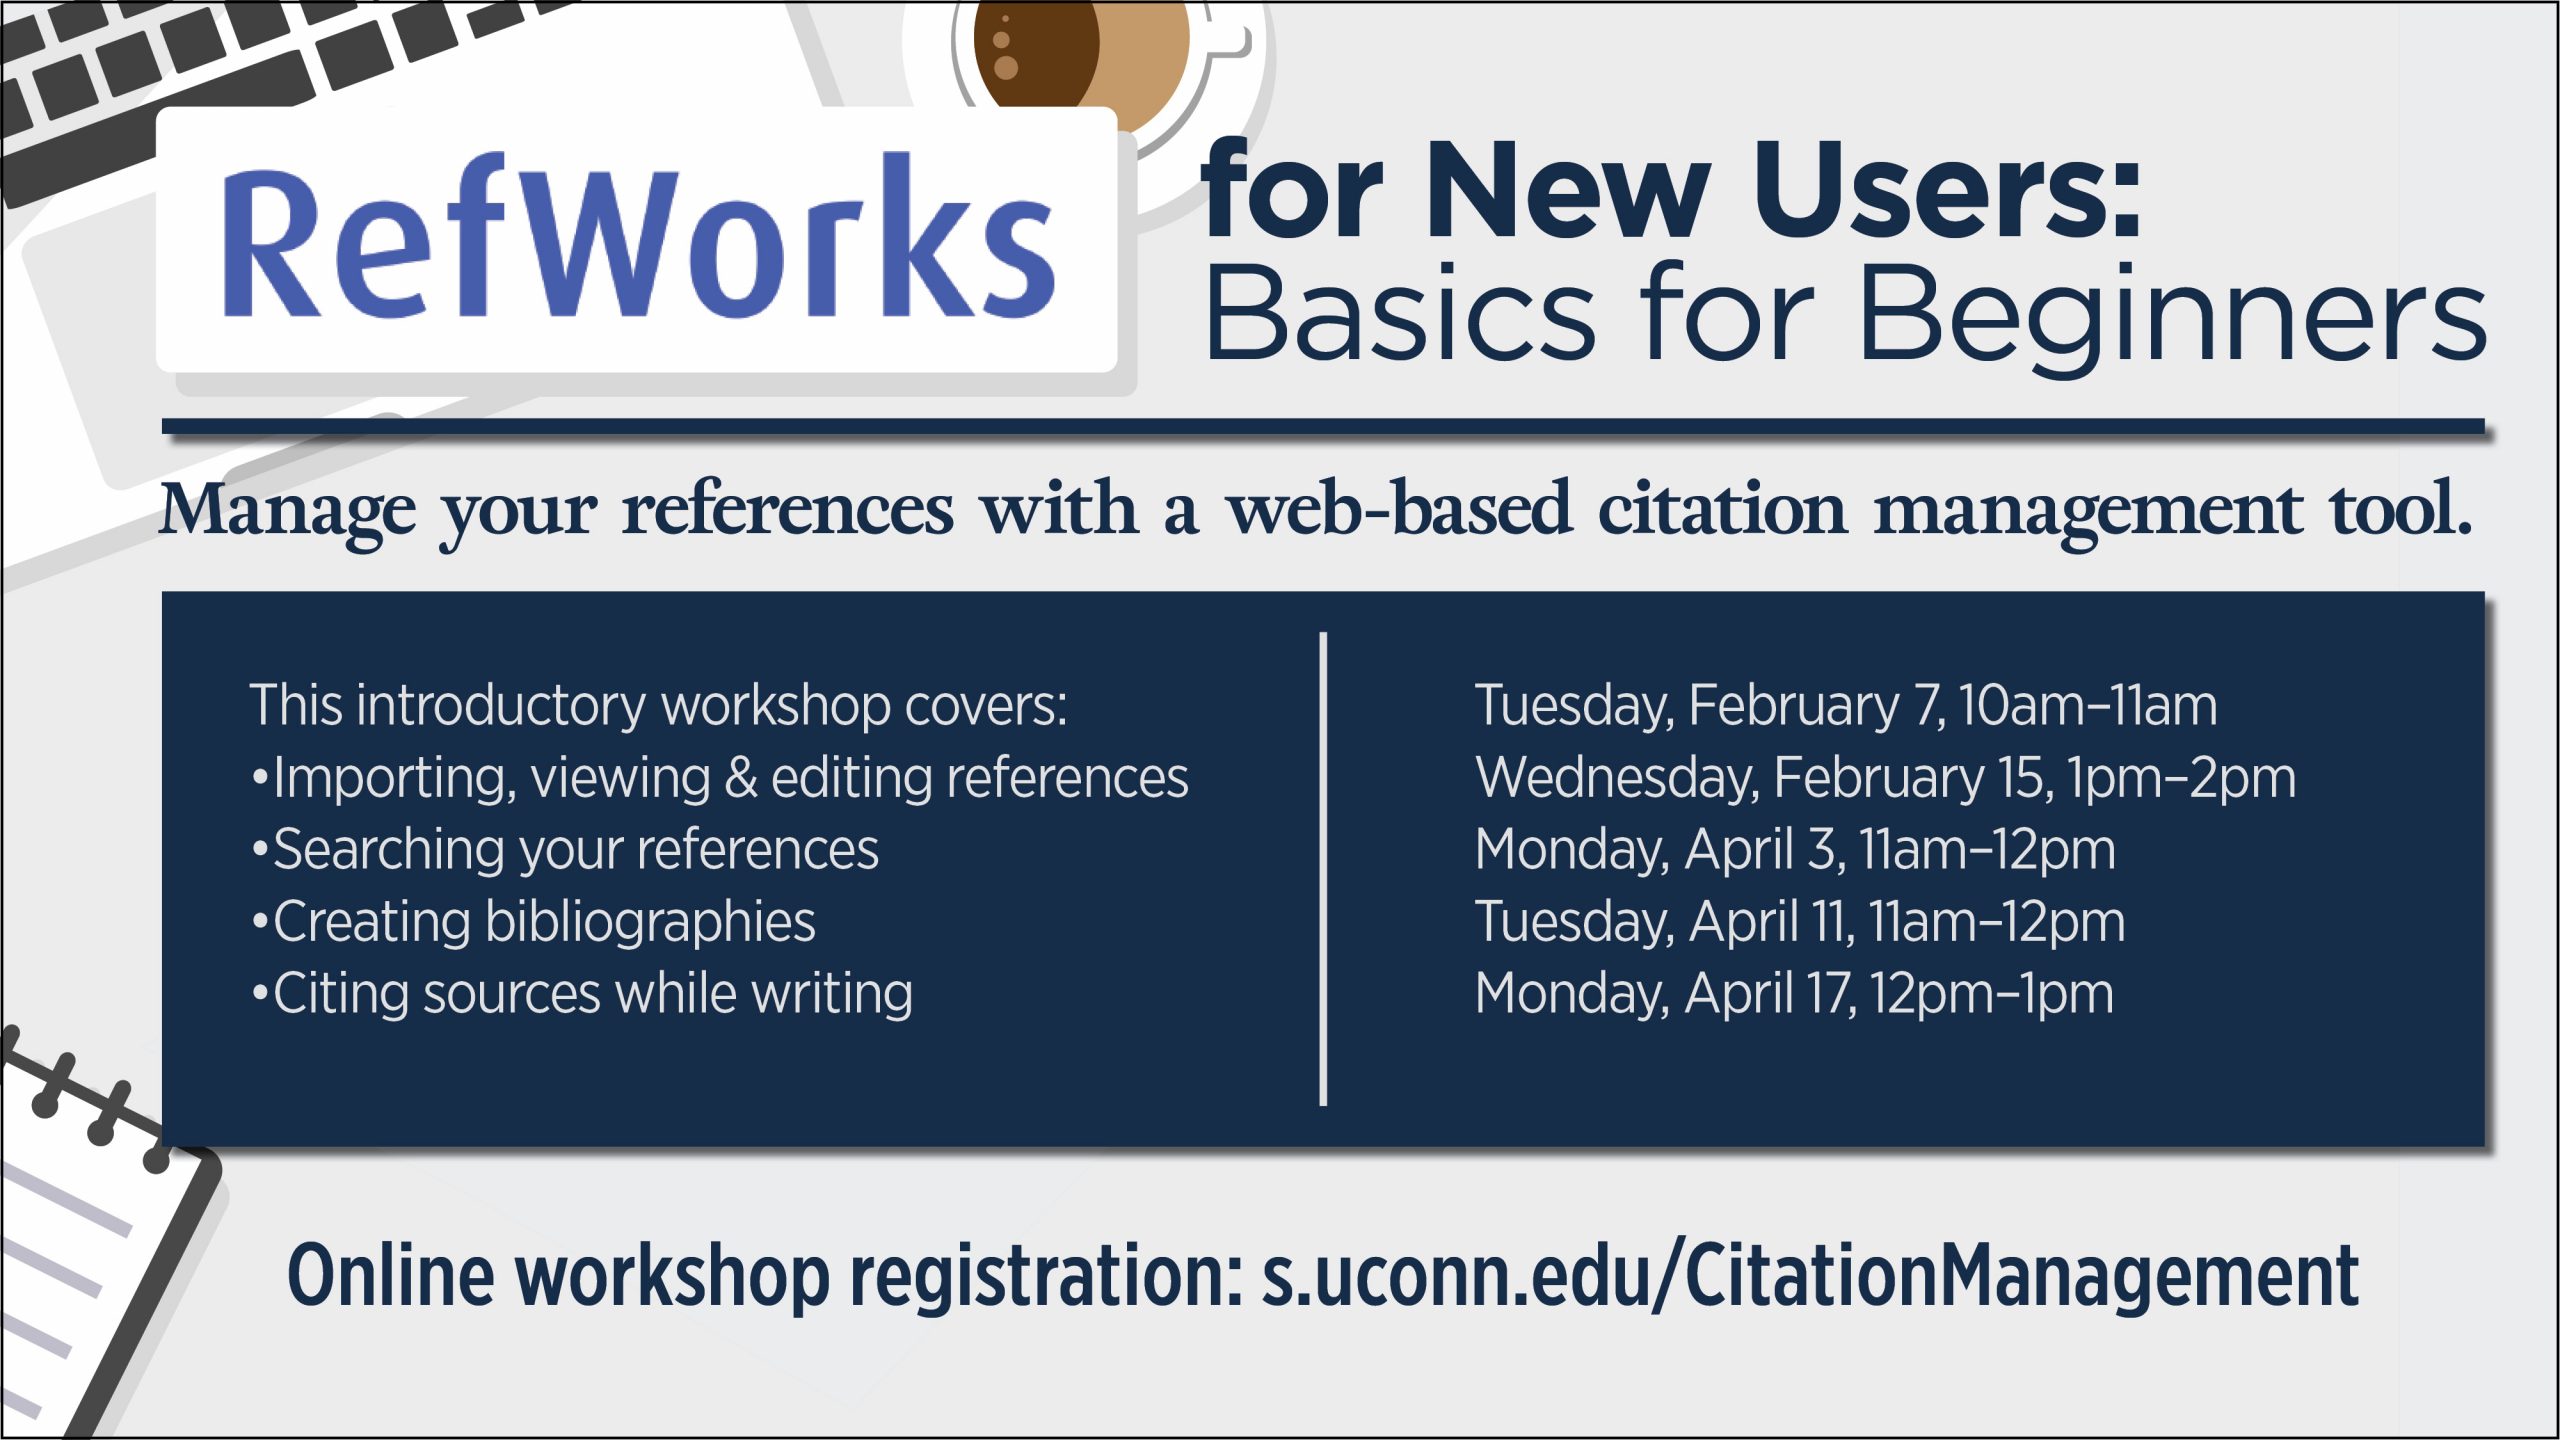 Marketing image with vector illustration of desktop with laptop and a cup of coffee, with the text: RefWorks; for New Users: Basics for Beginners. Manage your references with a web-based citation management tool. This introductory workshop covers: Importing, viewing & editing references; Searching your references; Creating bibliographies; Citing sources while writing. Tuesday, February 7, 10am–11am; Wednesday, February 15, 1pm–2pm; Monday, April 3, 11am–12pm; Tuesday, April 11, 11am–12pm; Monday, April 17, 12pm–1pm. Online workshop registration: s.uconn.edu/CitationManagement